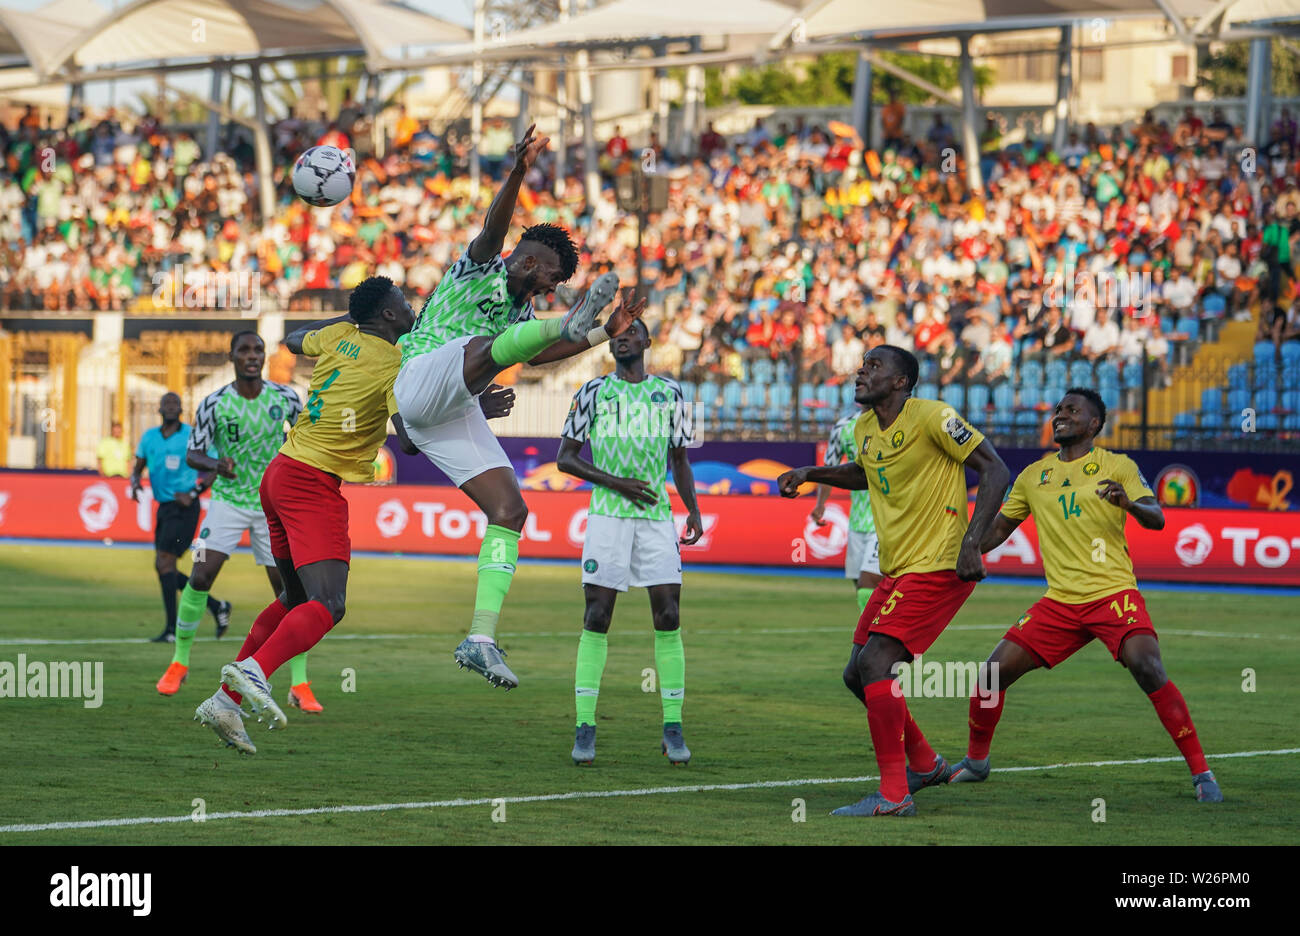 Alexandria, Egypt. 6th July 2019. FRANCE OUT July 6, 2019: Awaziem Chidozie Collins of Nigeria and Yaya Banana of Cameroon challenging for the ball during the 2019 African Cup of Nations match between Cameroon and Nigeria at the Alexanddria Stadium in Alexandria, Egypt. Ulrik Pedersen/CSM. Stock Photo